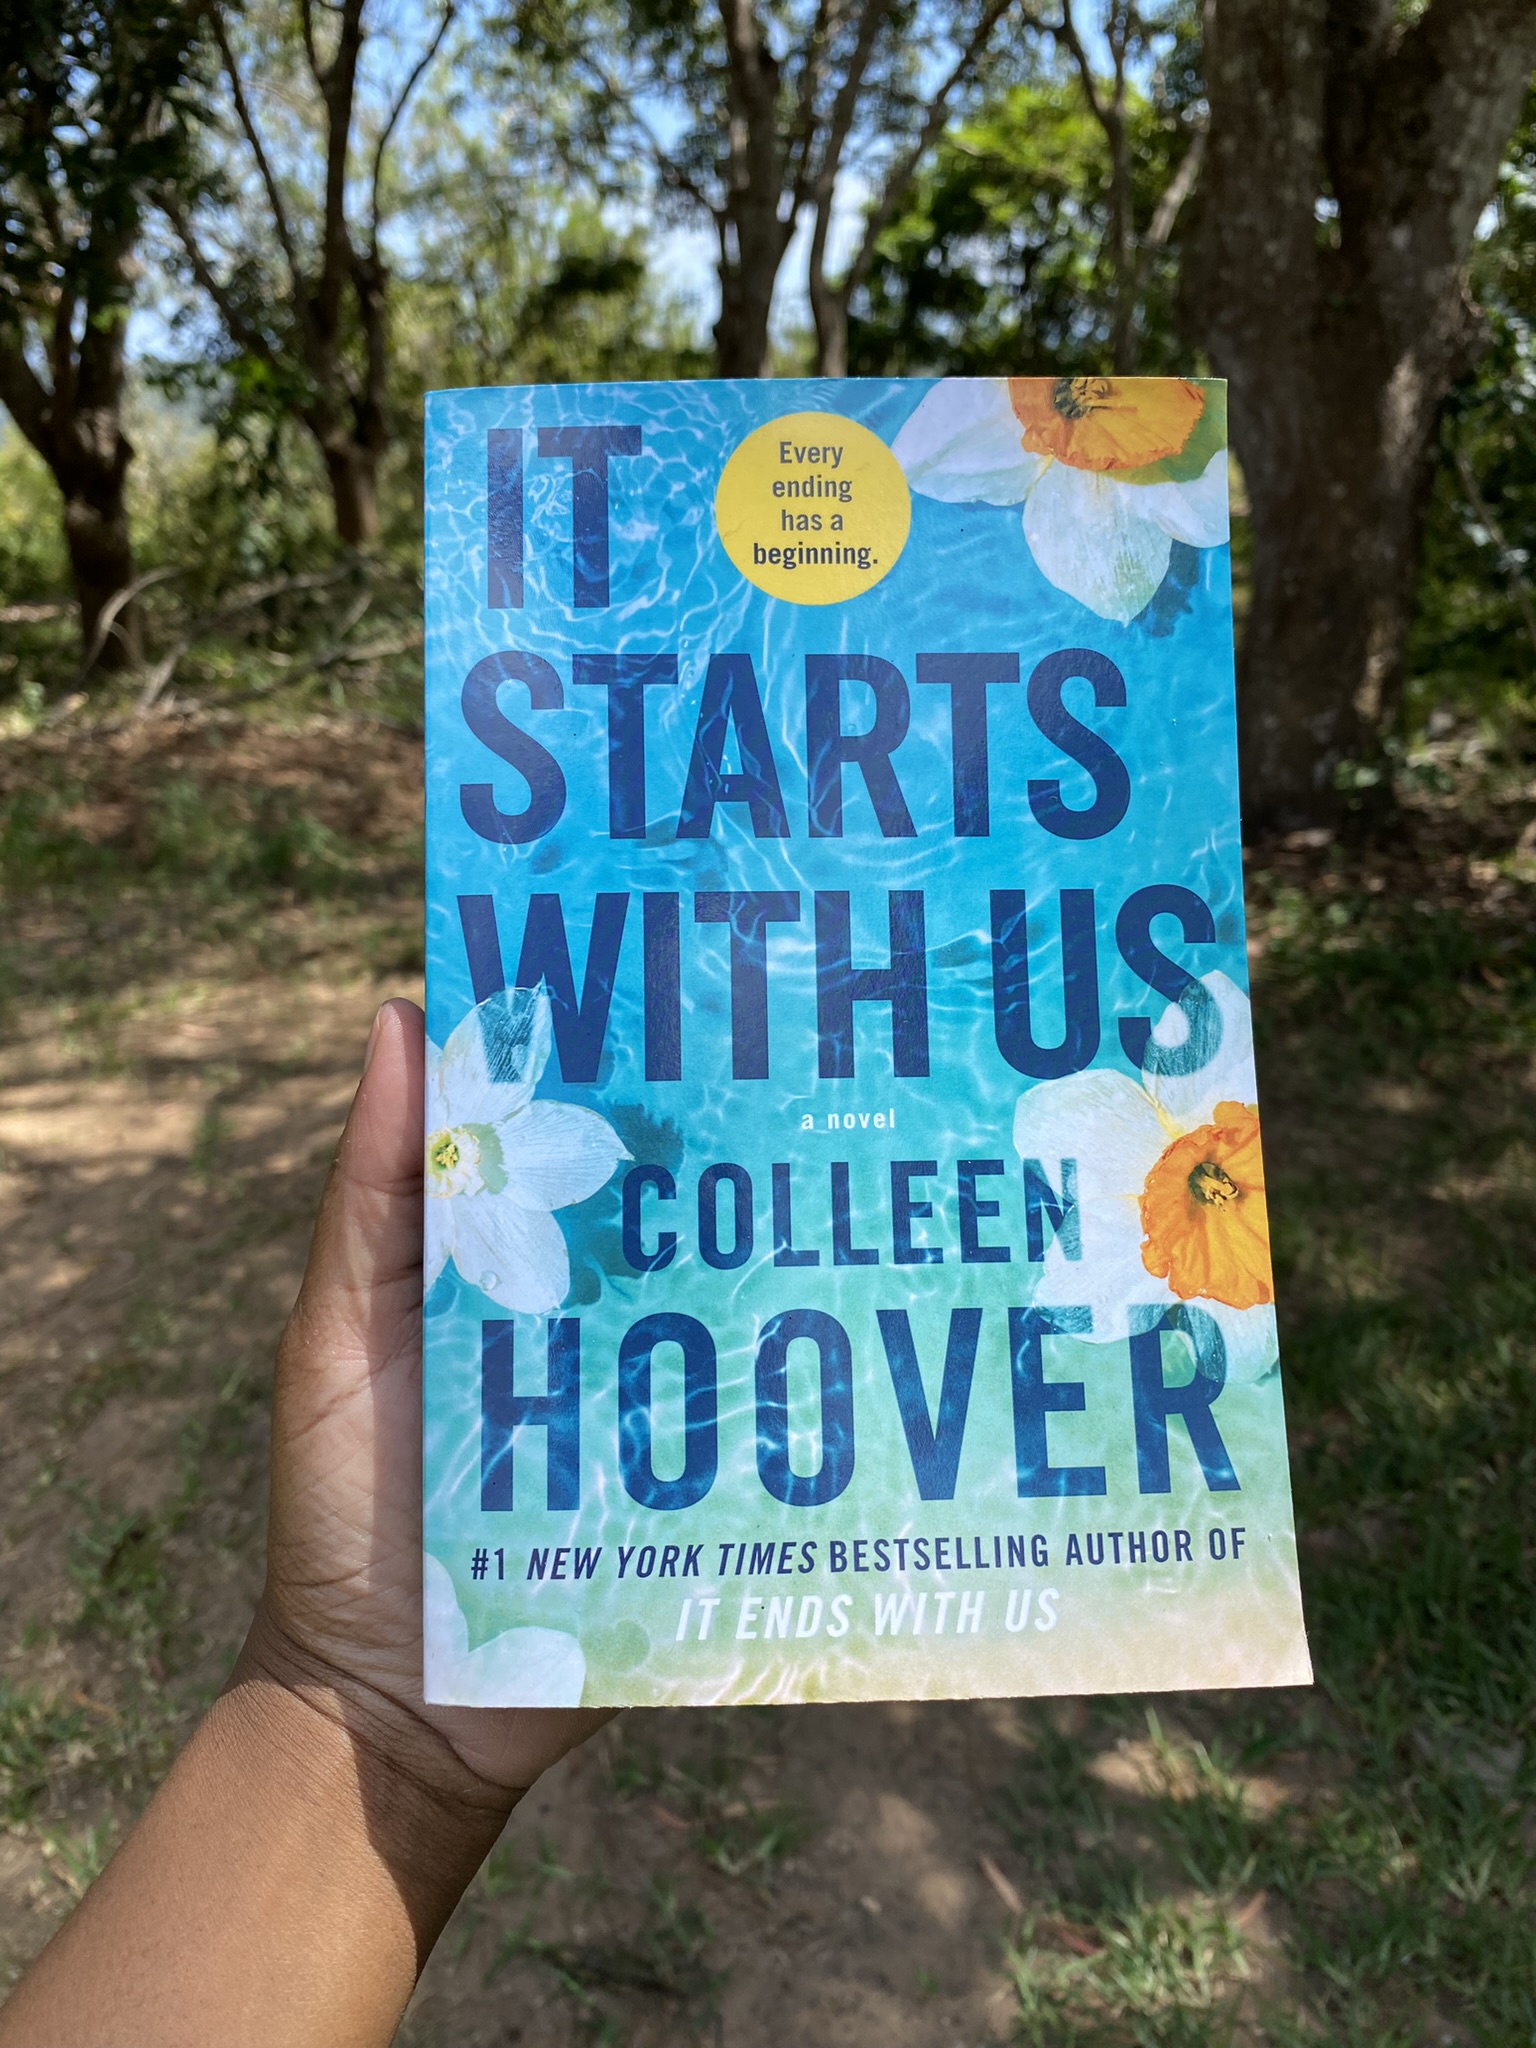 Holding It Starts with Us by Colleen Hoover